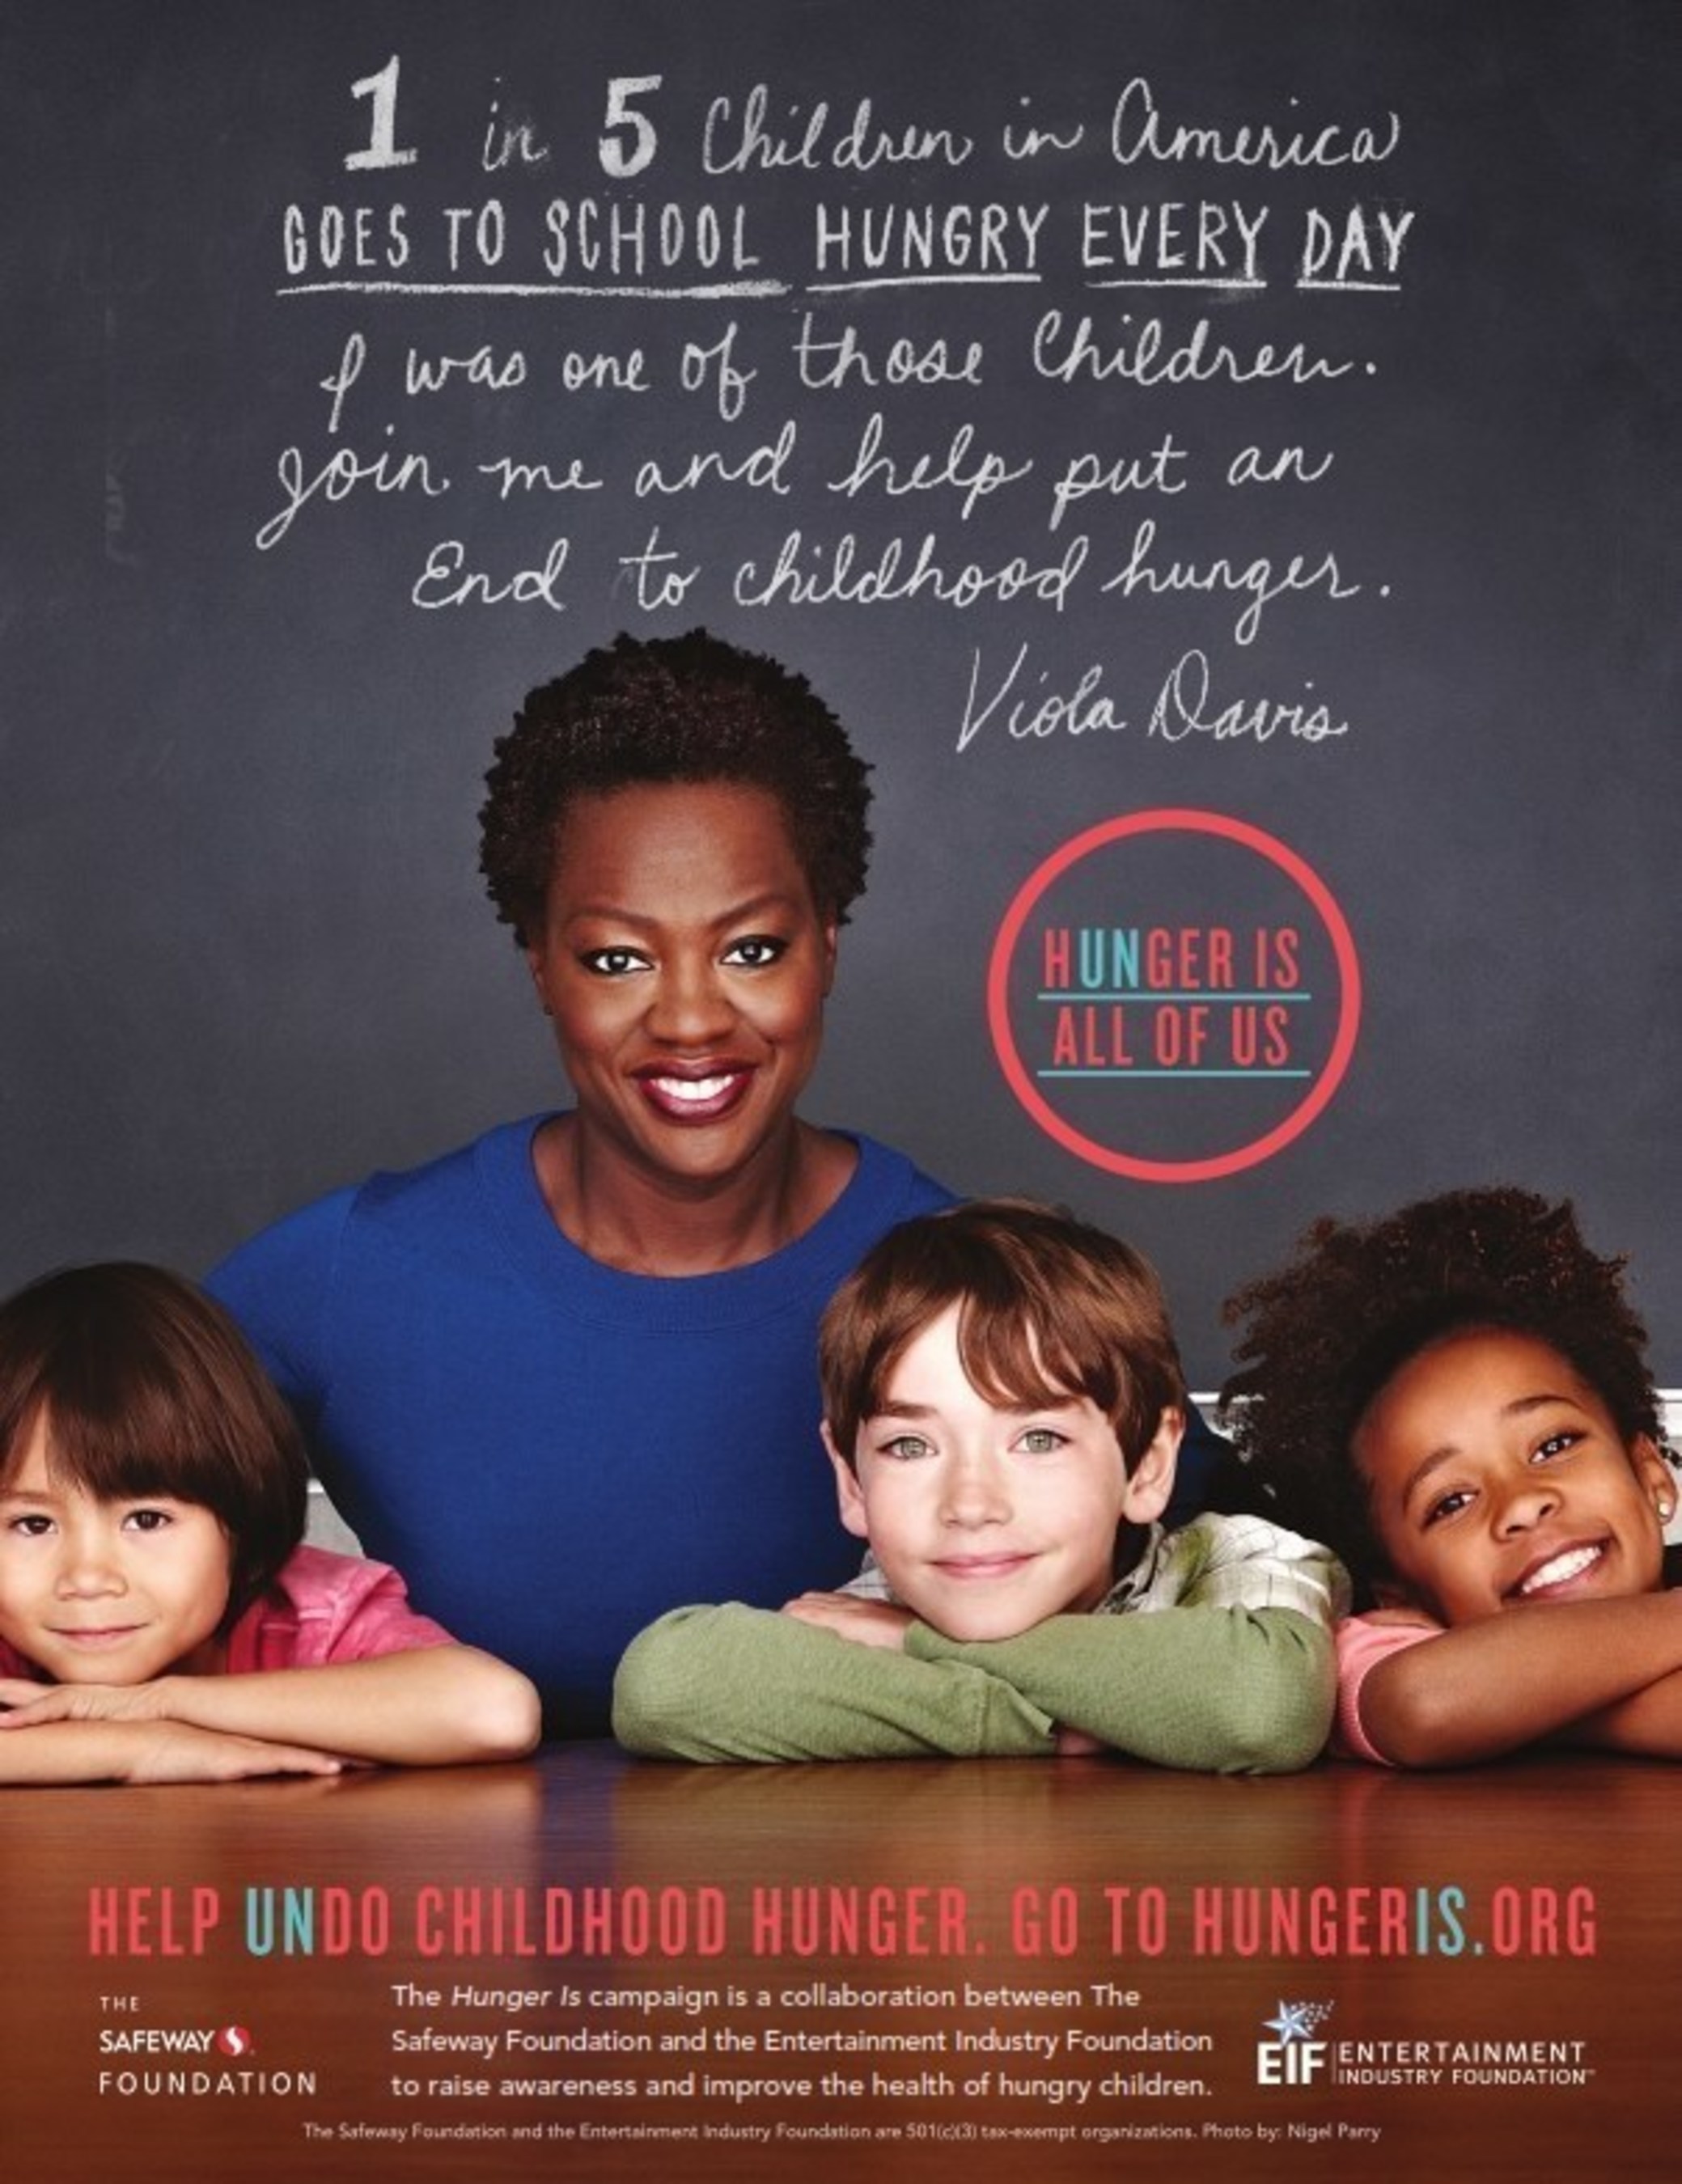 Award-winning actress and Hunger Is Ambassador Viola Davis supporting the fight to eradicate childhood hunger in the United States.